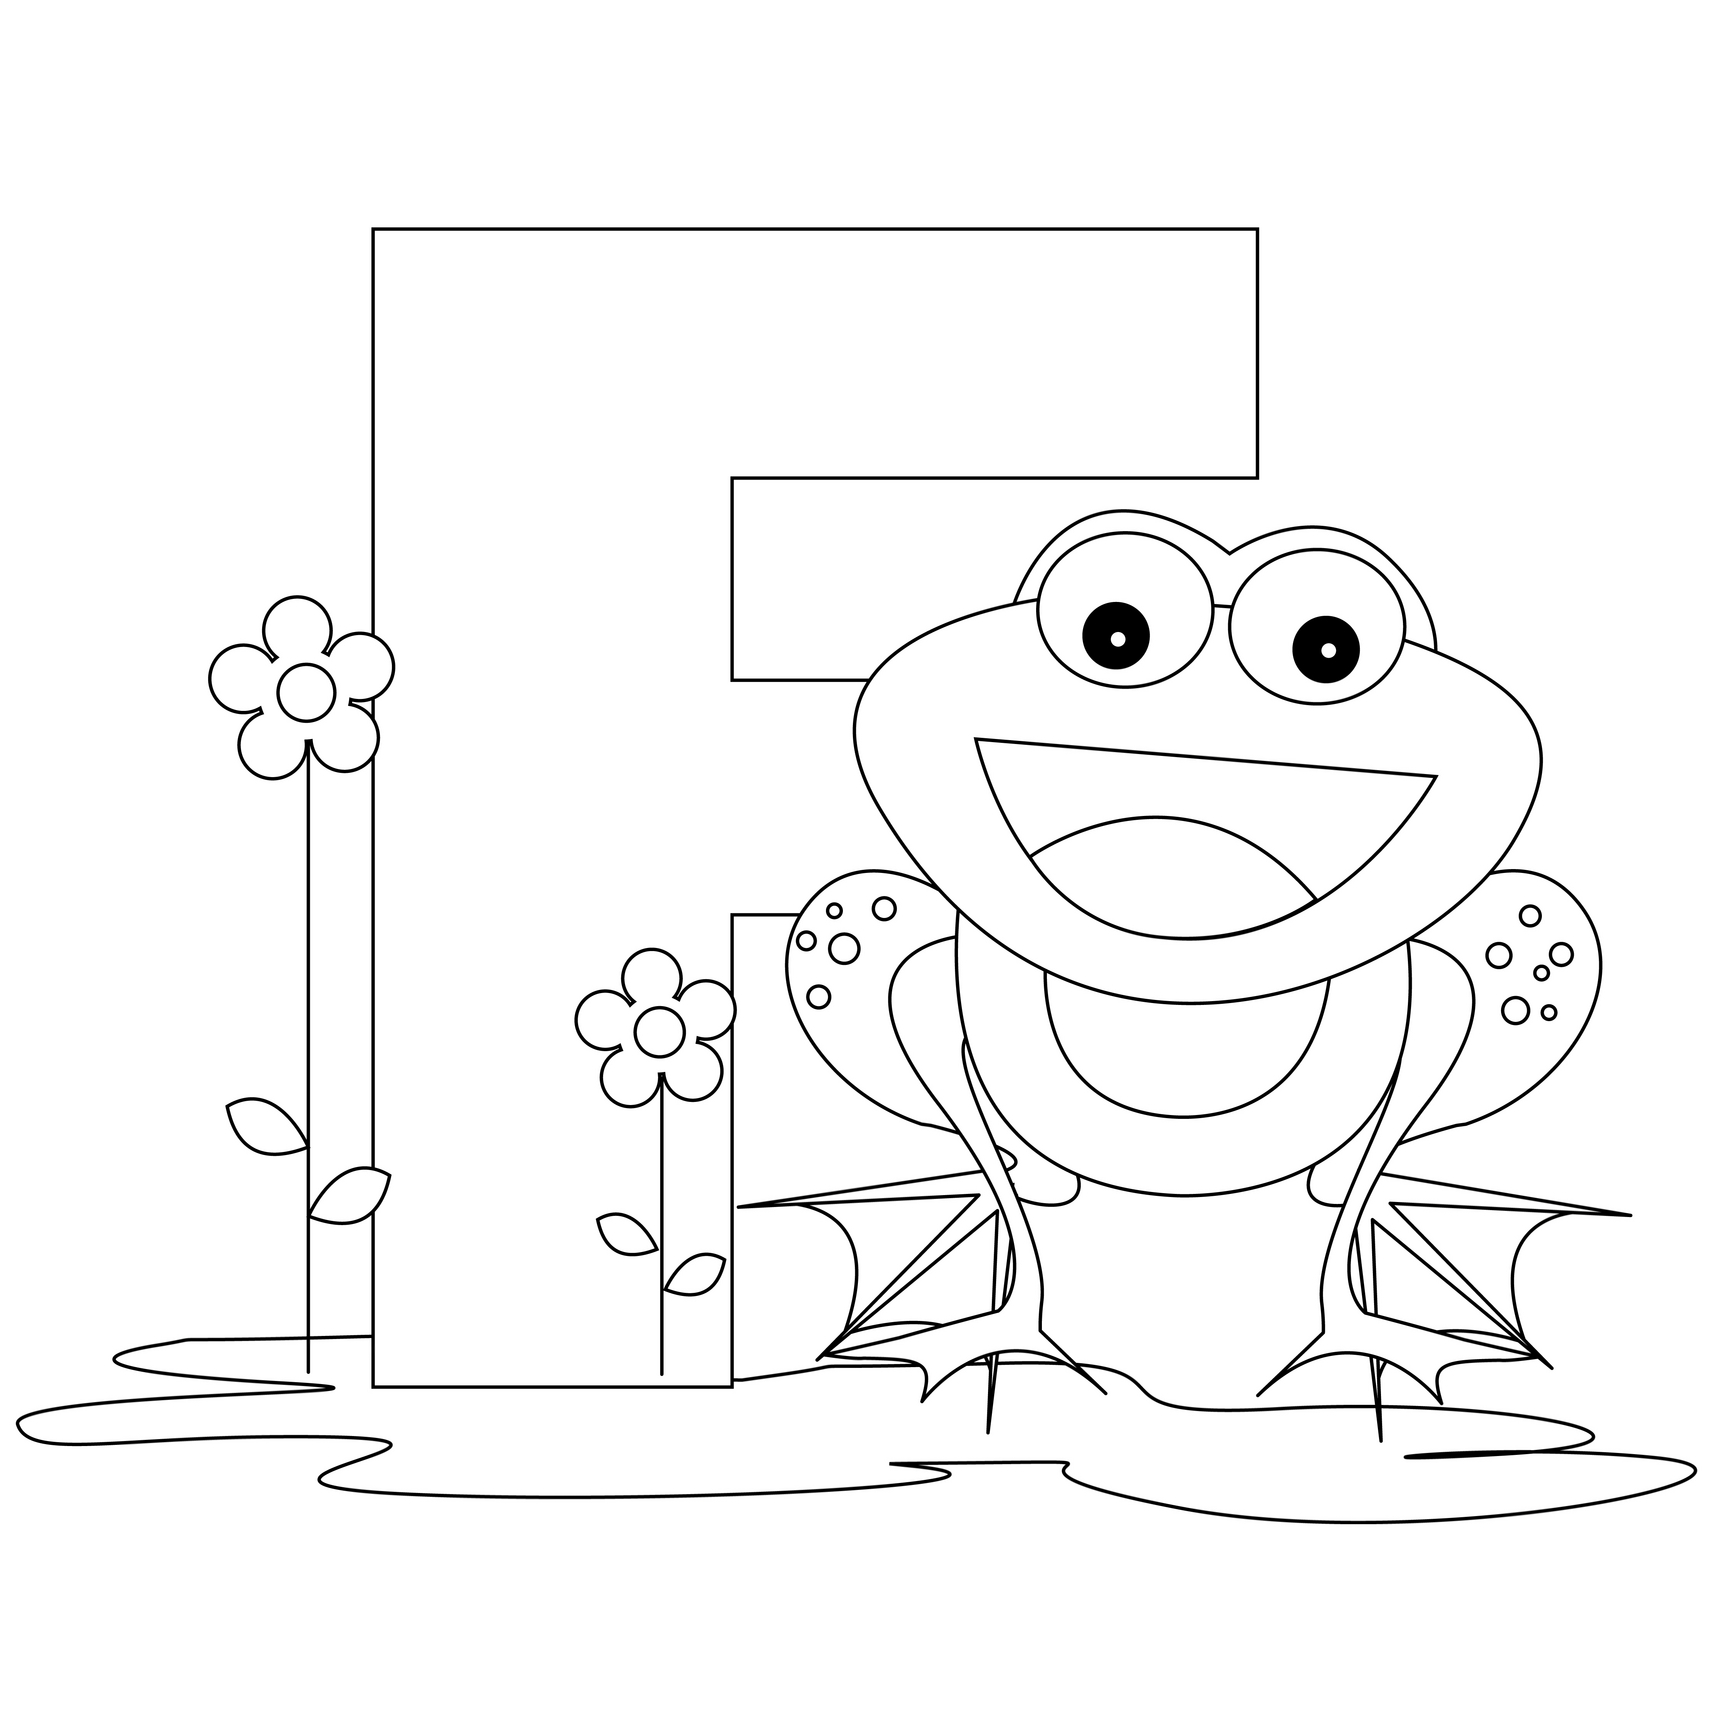 Letter F coloring pages